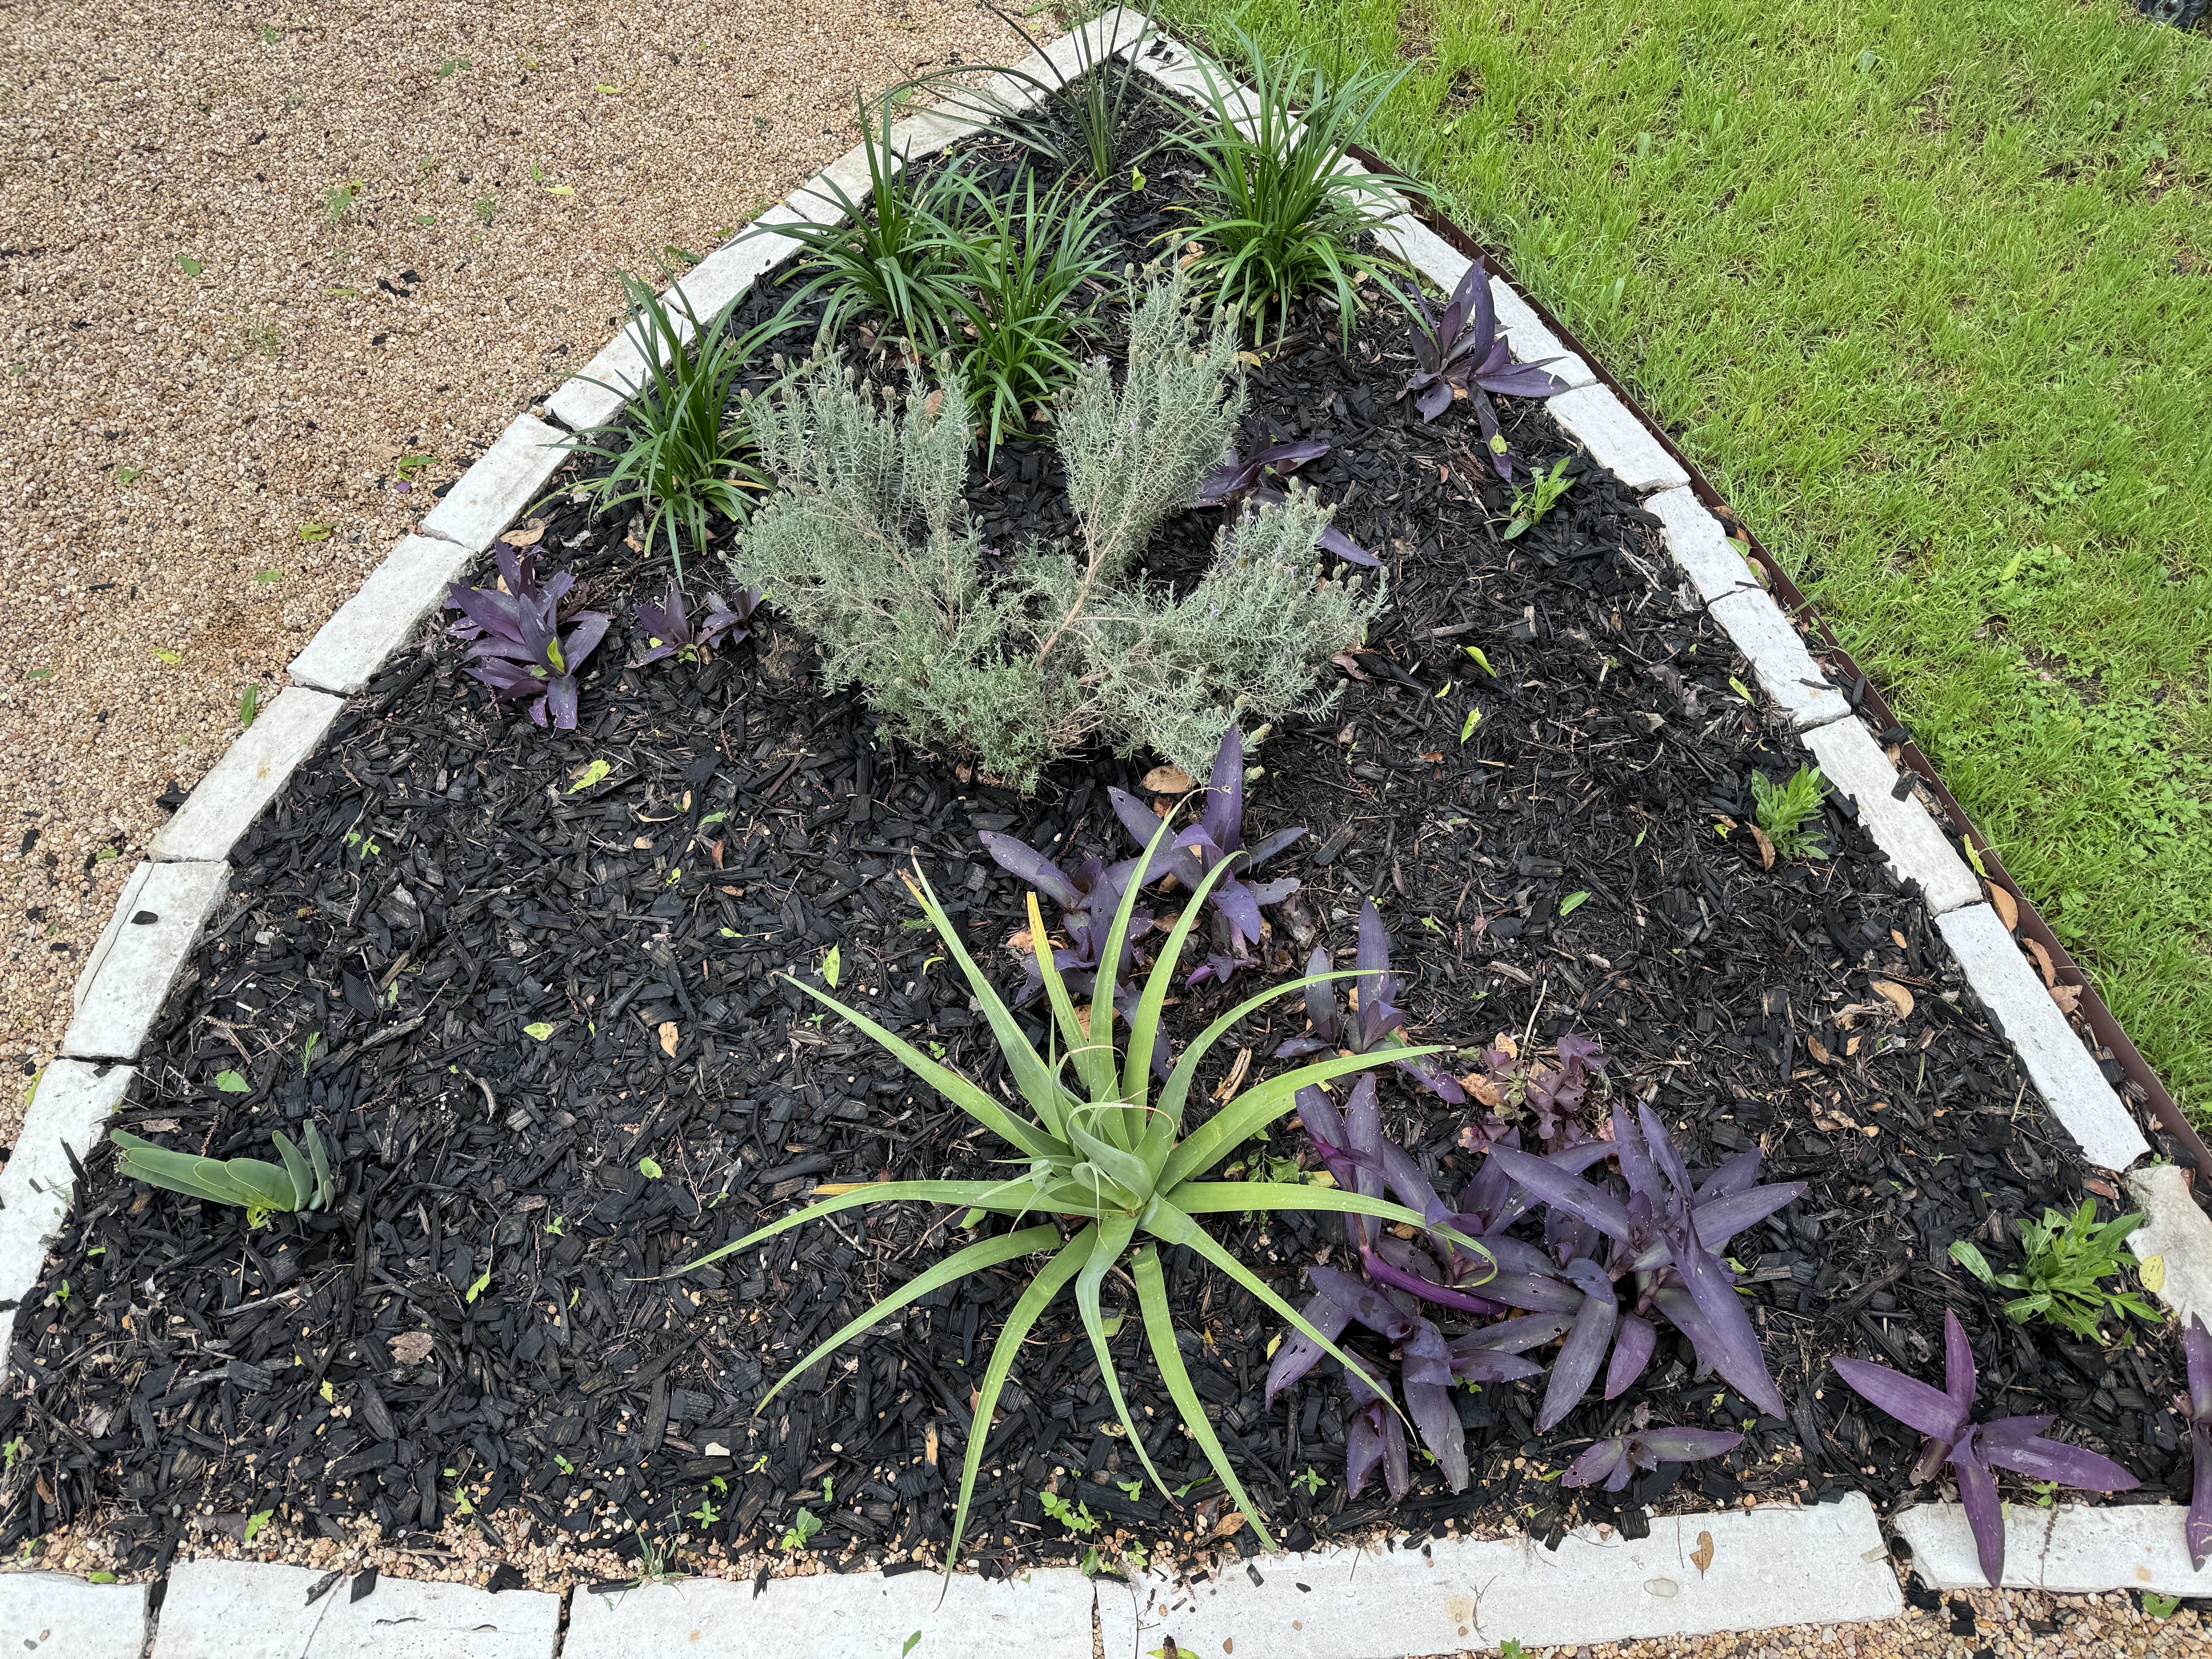 An urban garden bed with a variety of plants including purple-leafed shrubs, succulents, and green grasses, surrounded by a white brick border, mulched with dark wood chips, highlighting sustainable gardening practices in a suburban setting.